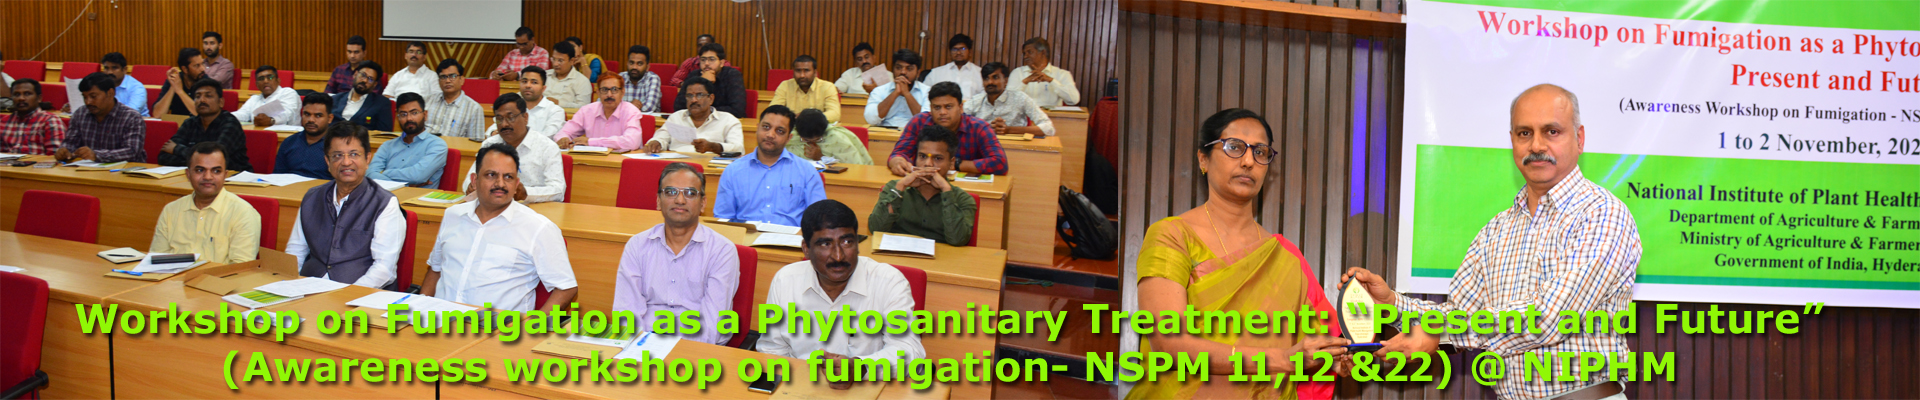 Workshop on Fumigation as a Phytosanitary Treatment